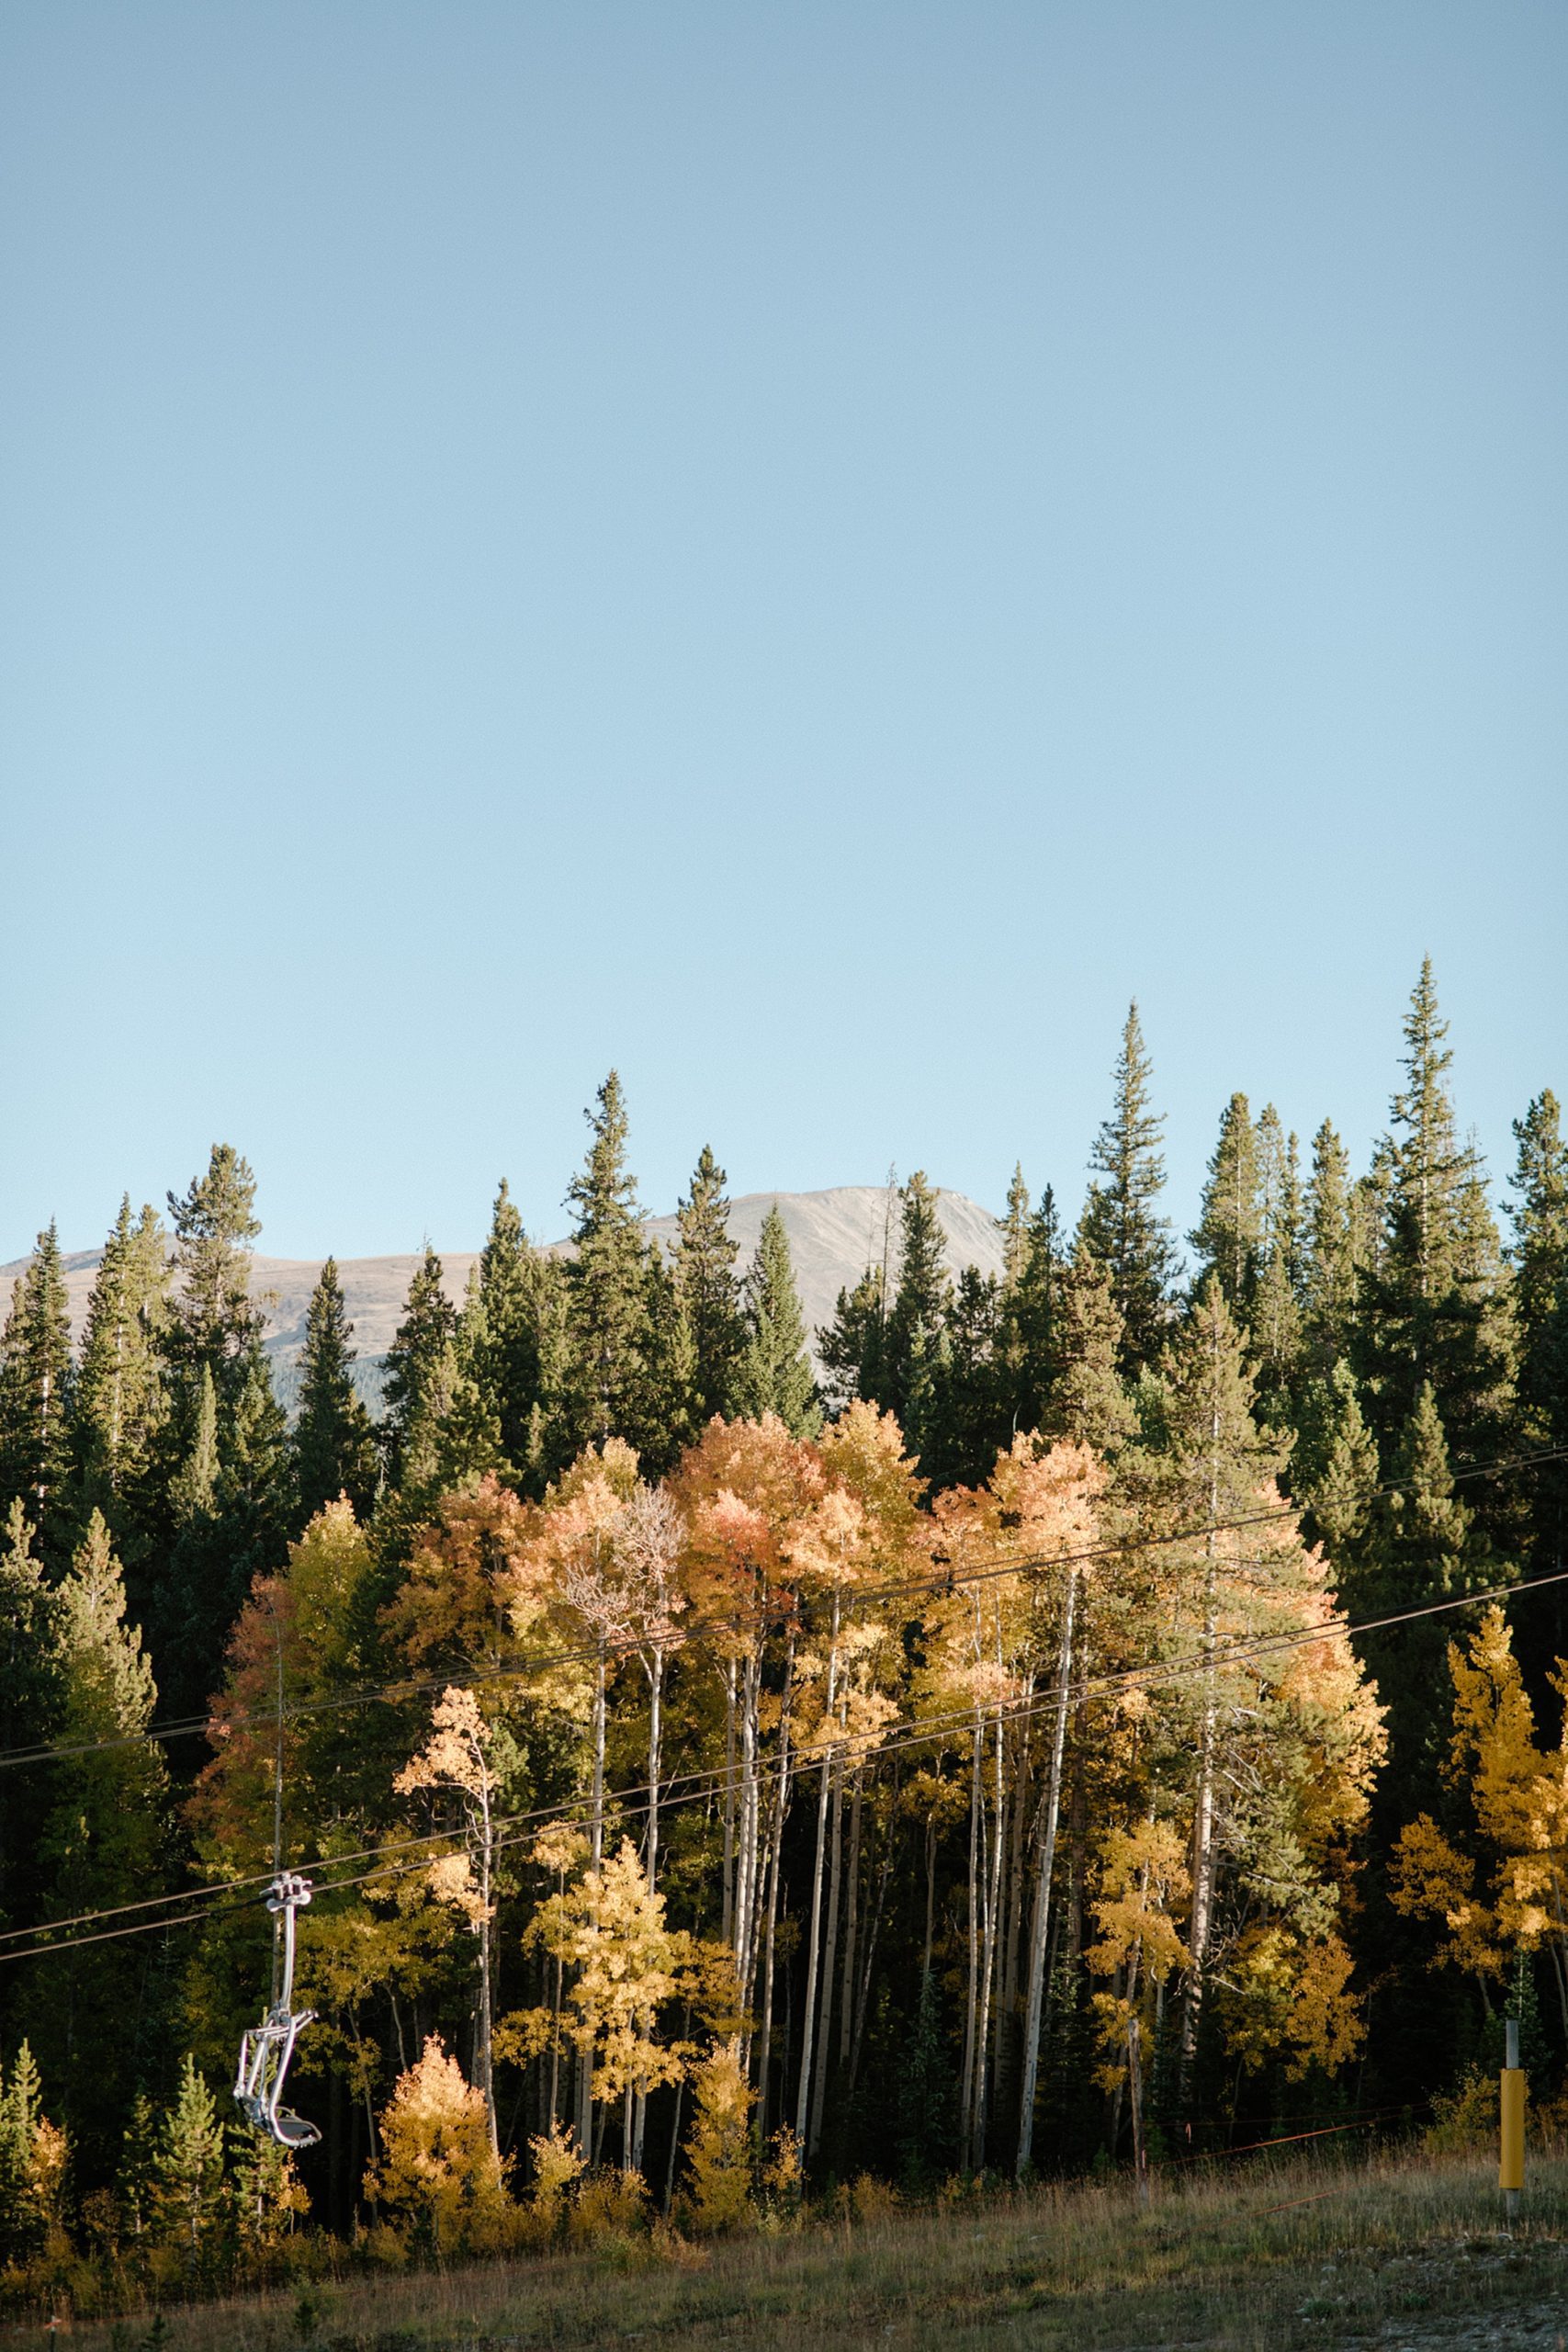 Aspens turning yellow in the fall at Ten Mile Station wedding venue